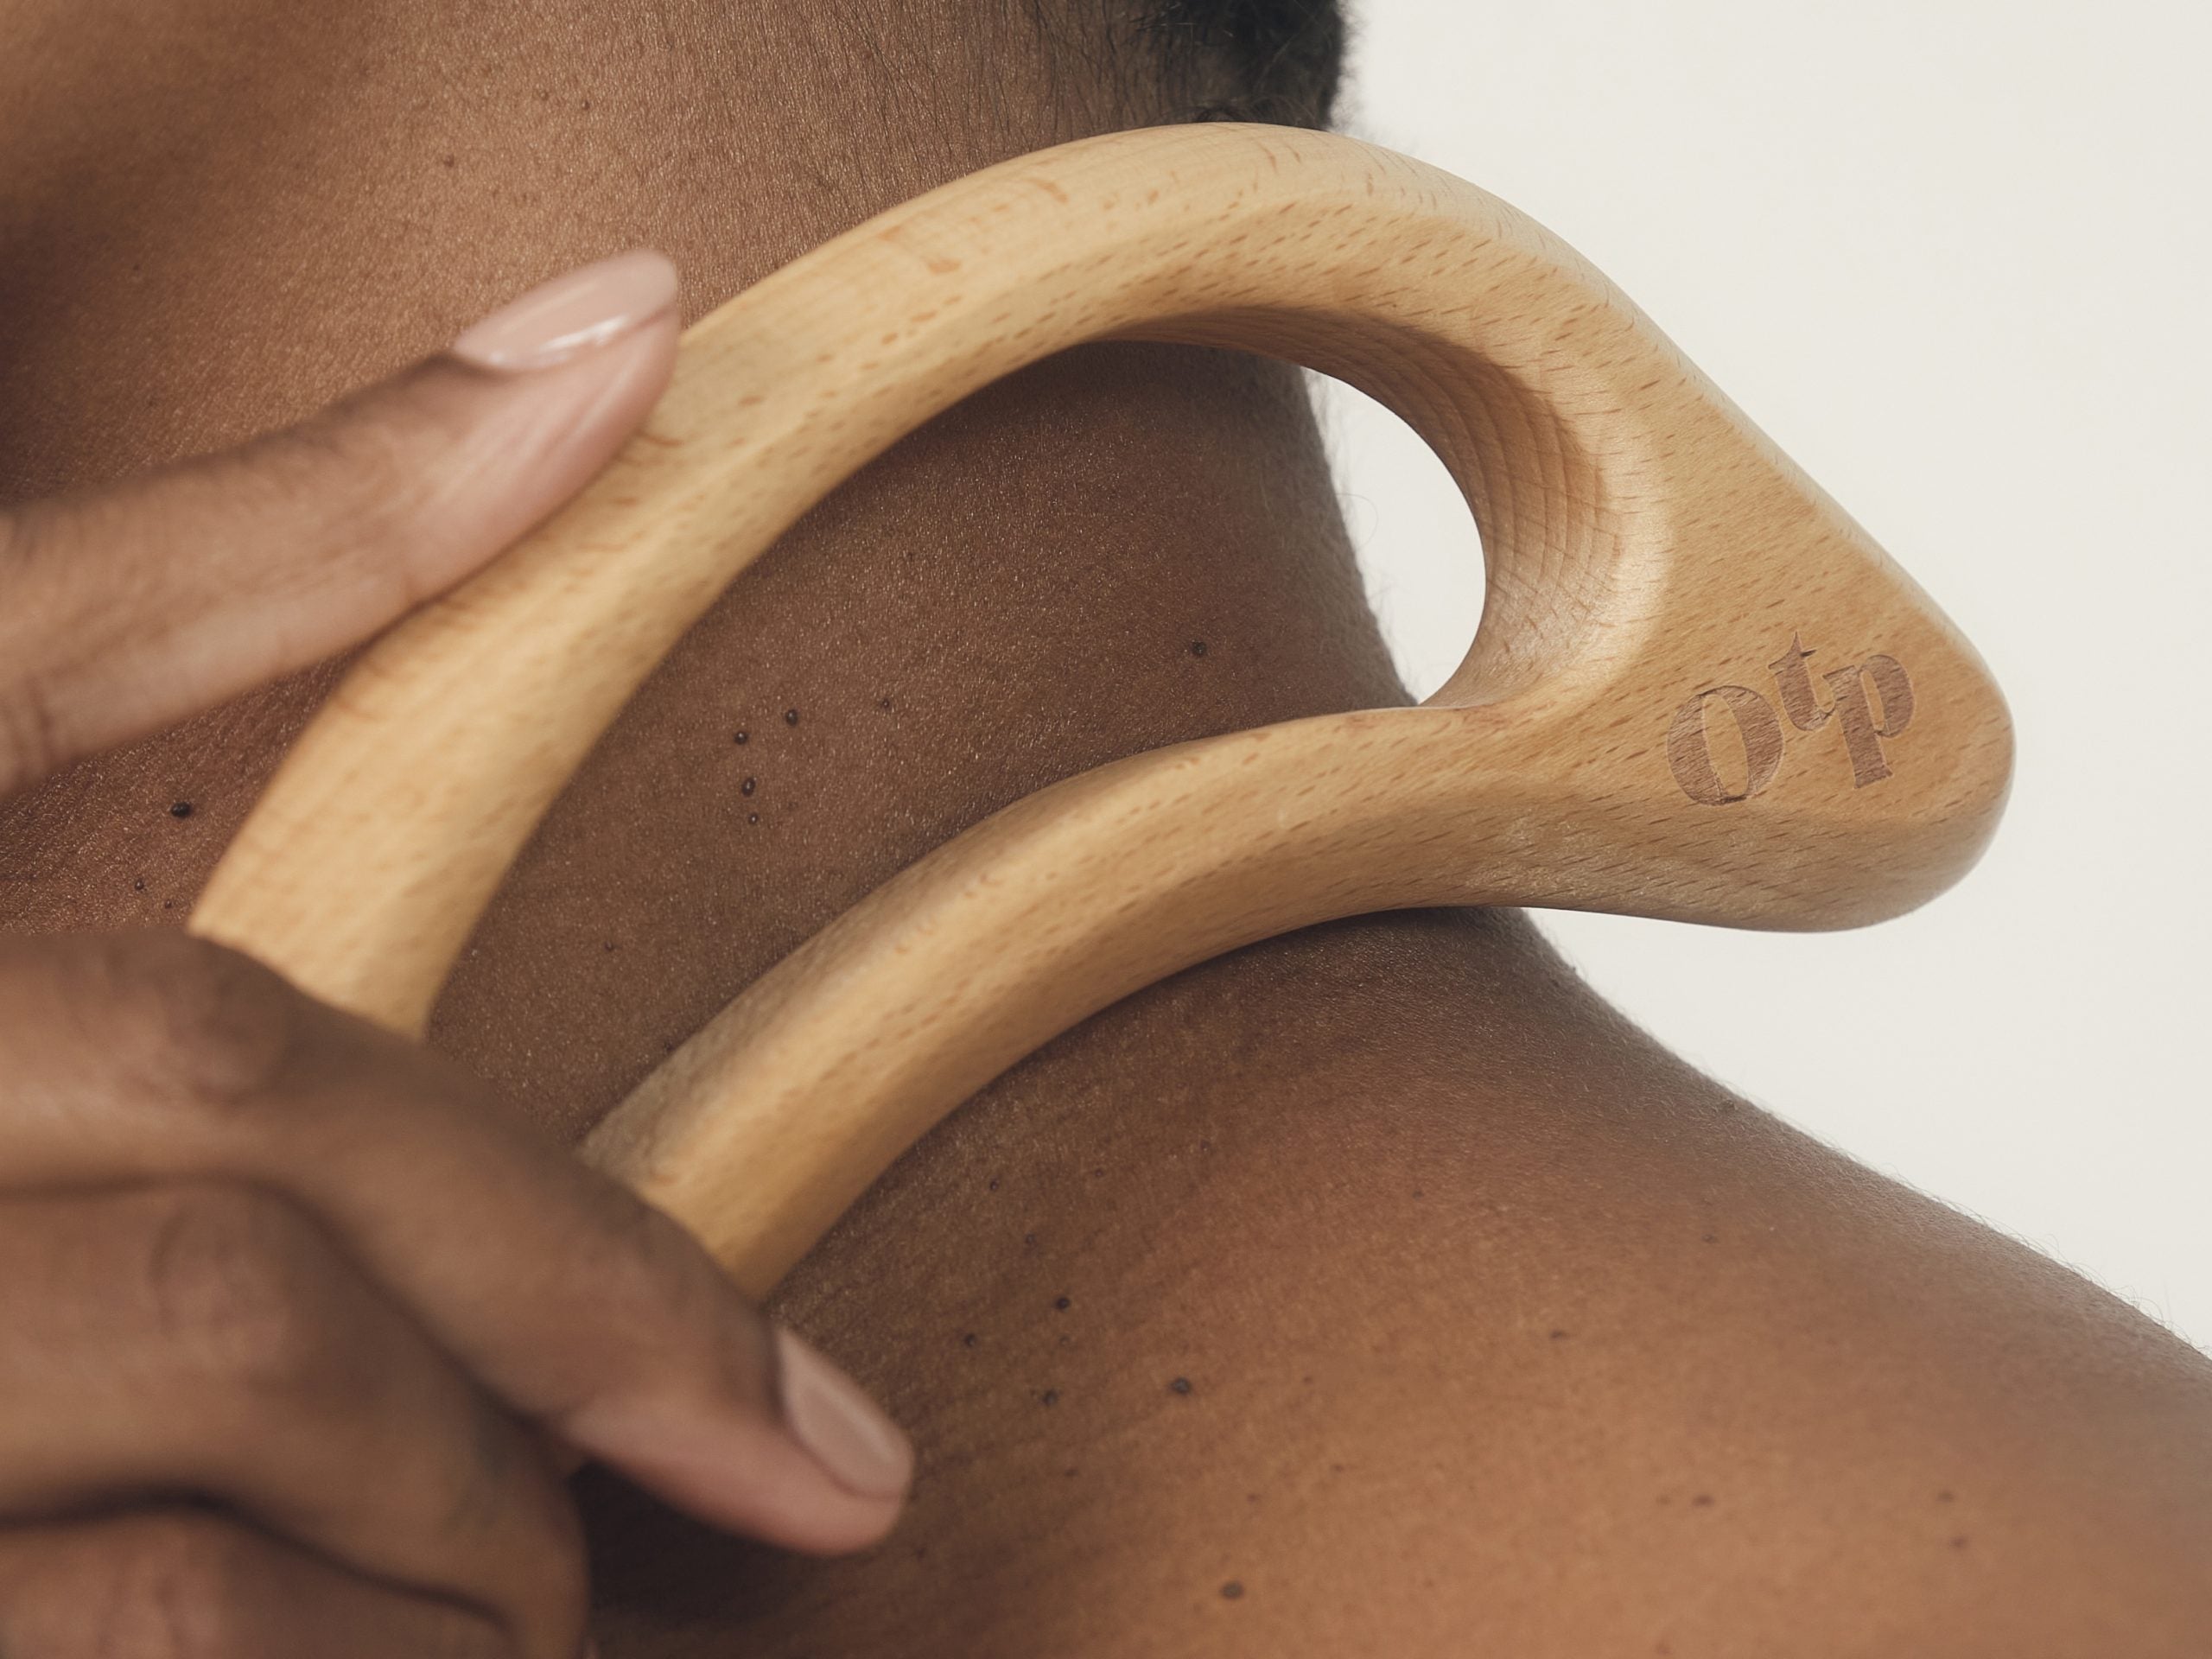 Oui The People’s New Tool Makes At-Home Lymphatic Drainage Massages Easier